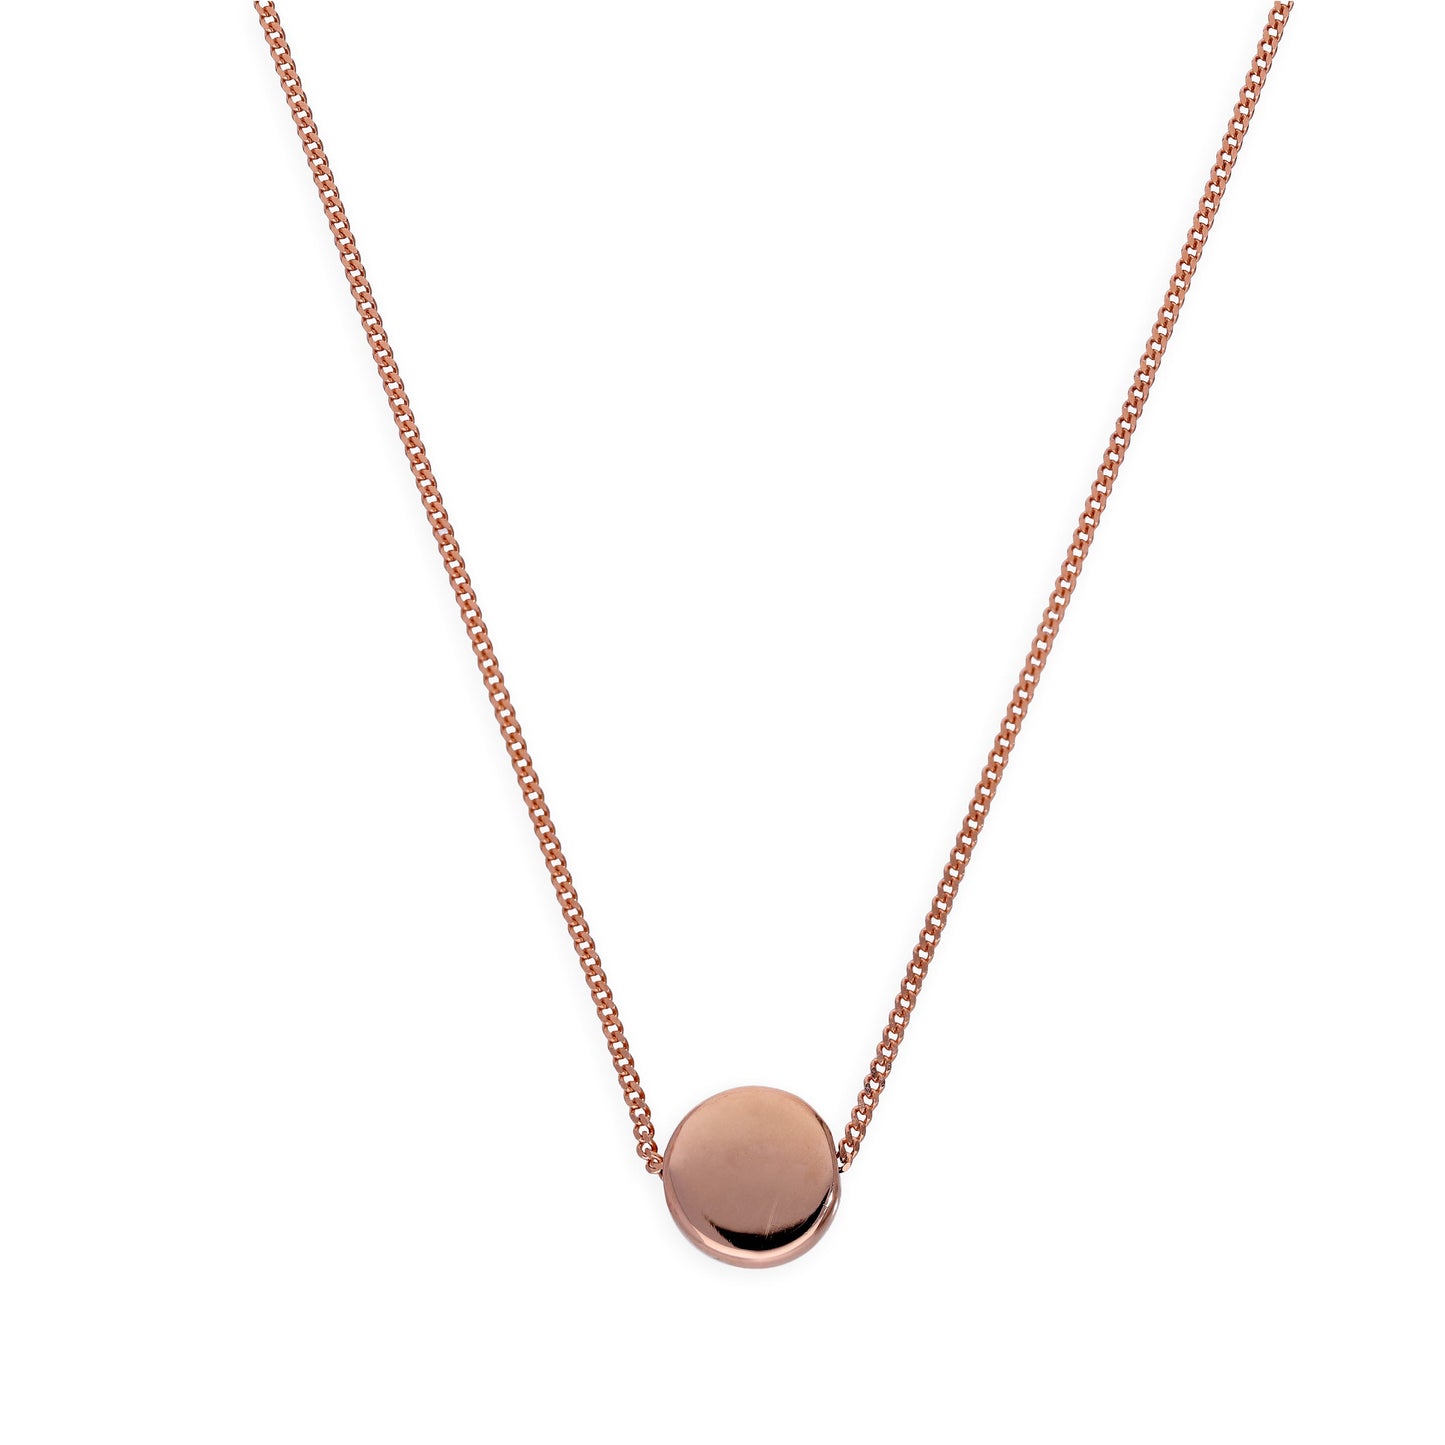 Rose Gold Plated Sterling Silver Round Disc 16 Inch Necklace